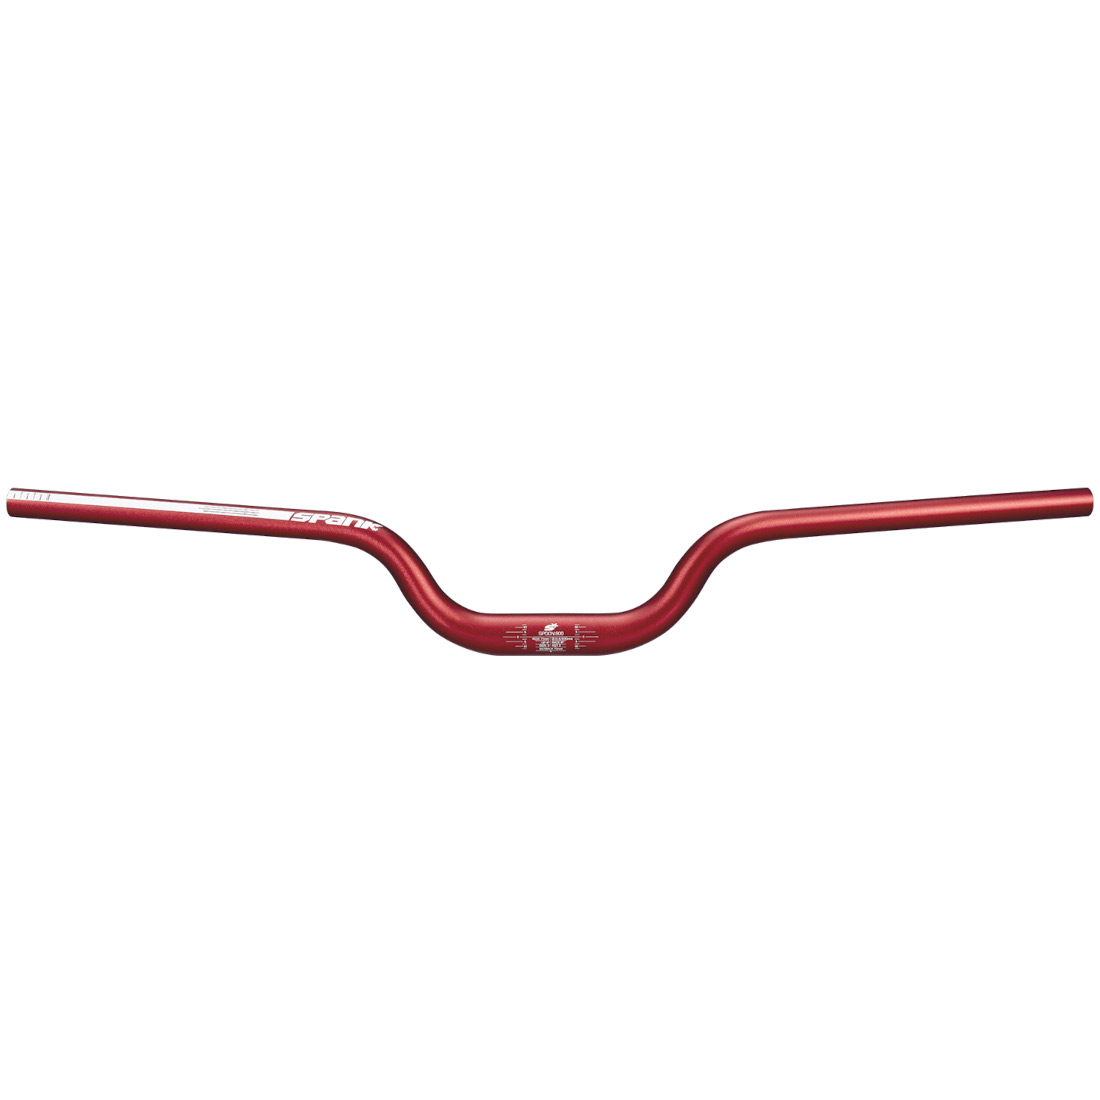 Picture of Spank Spoon 800 MTB Handlebar - red